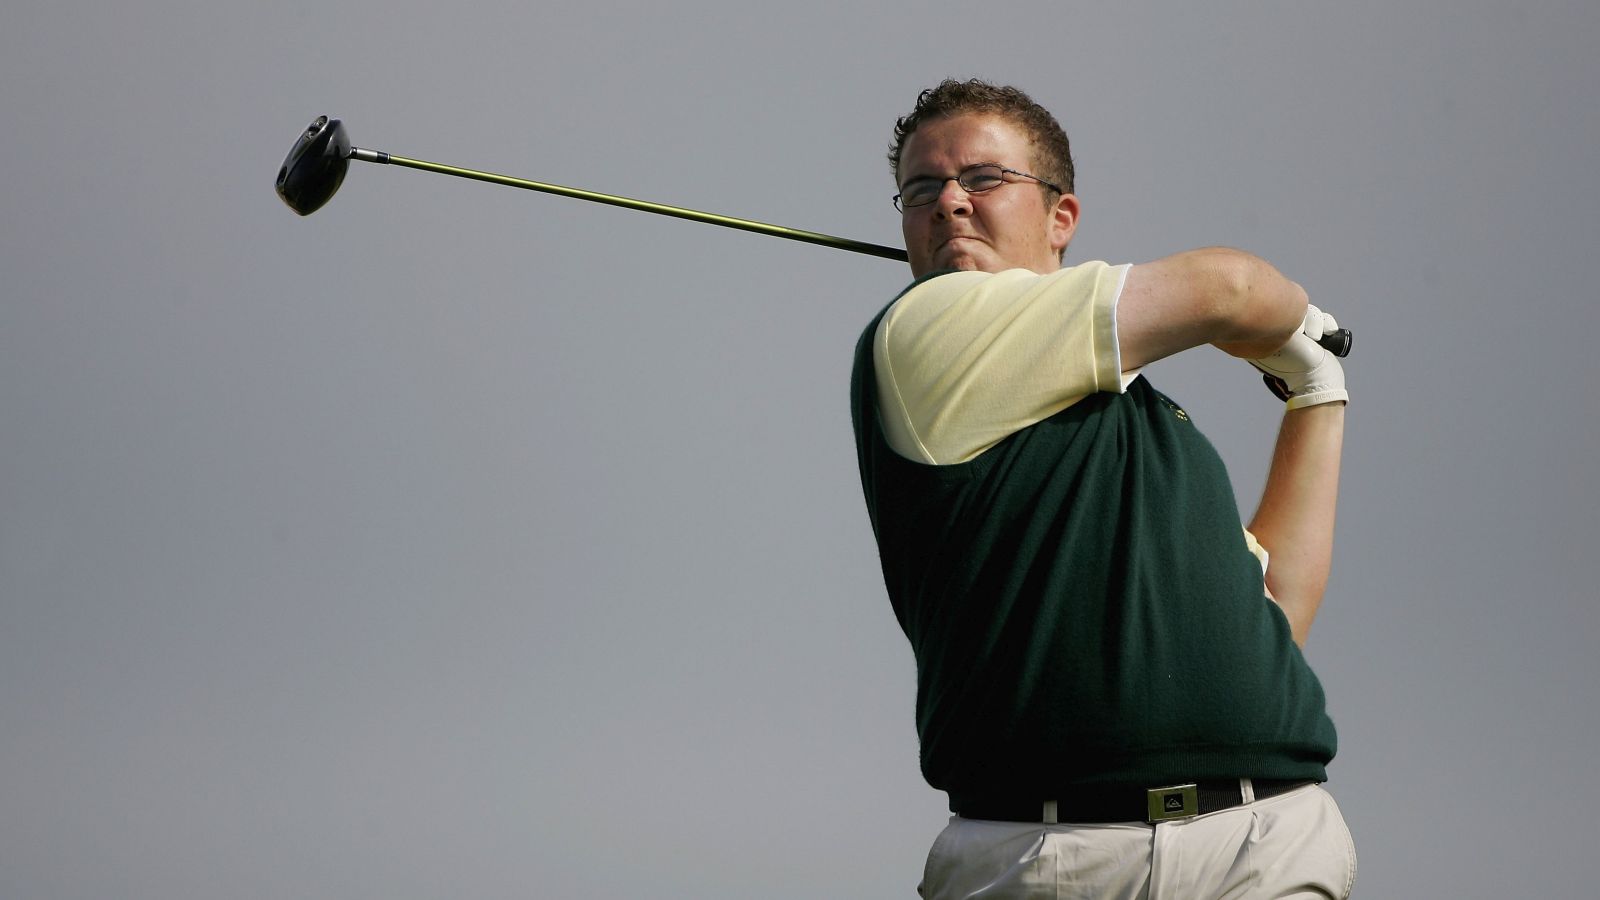 2005 - Shane Lowry bei der Boys Amateur Championship in England. © Andrew Redington/Getty Images